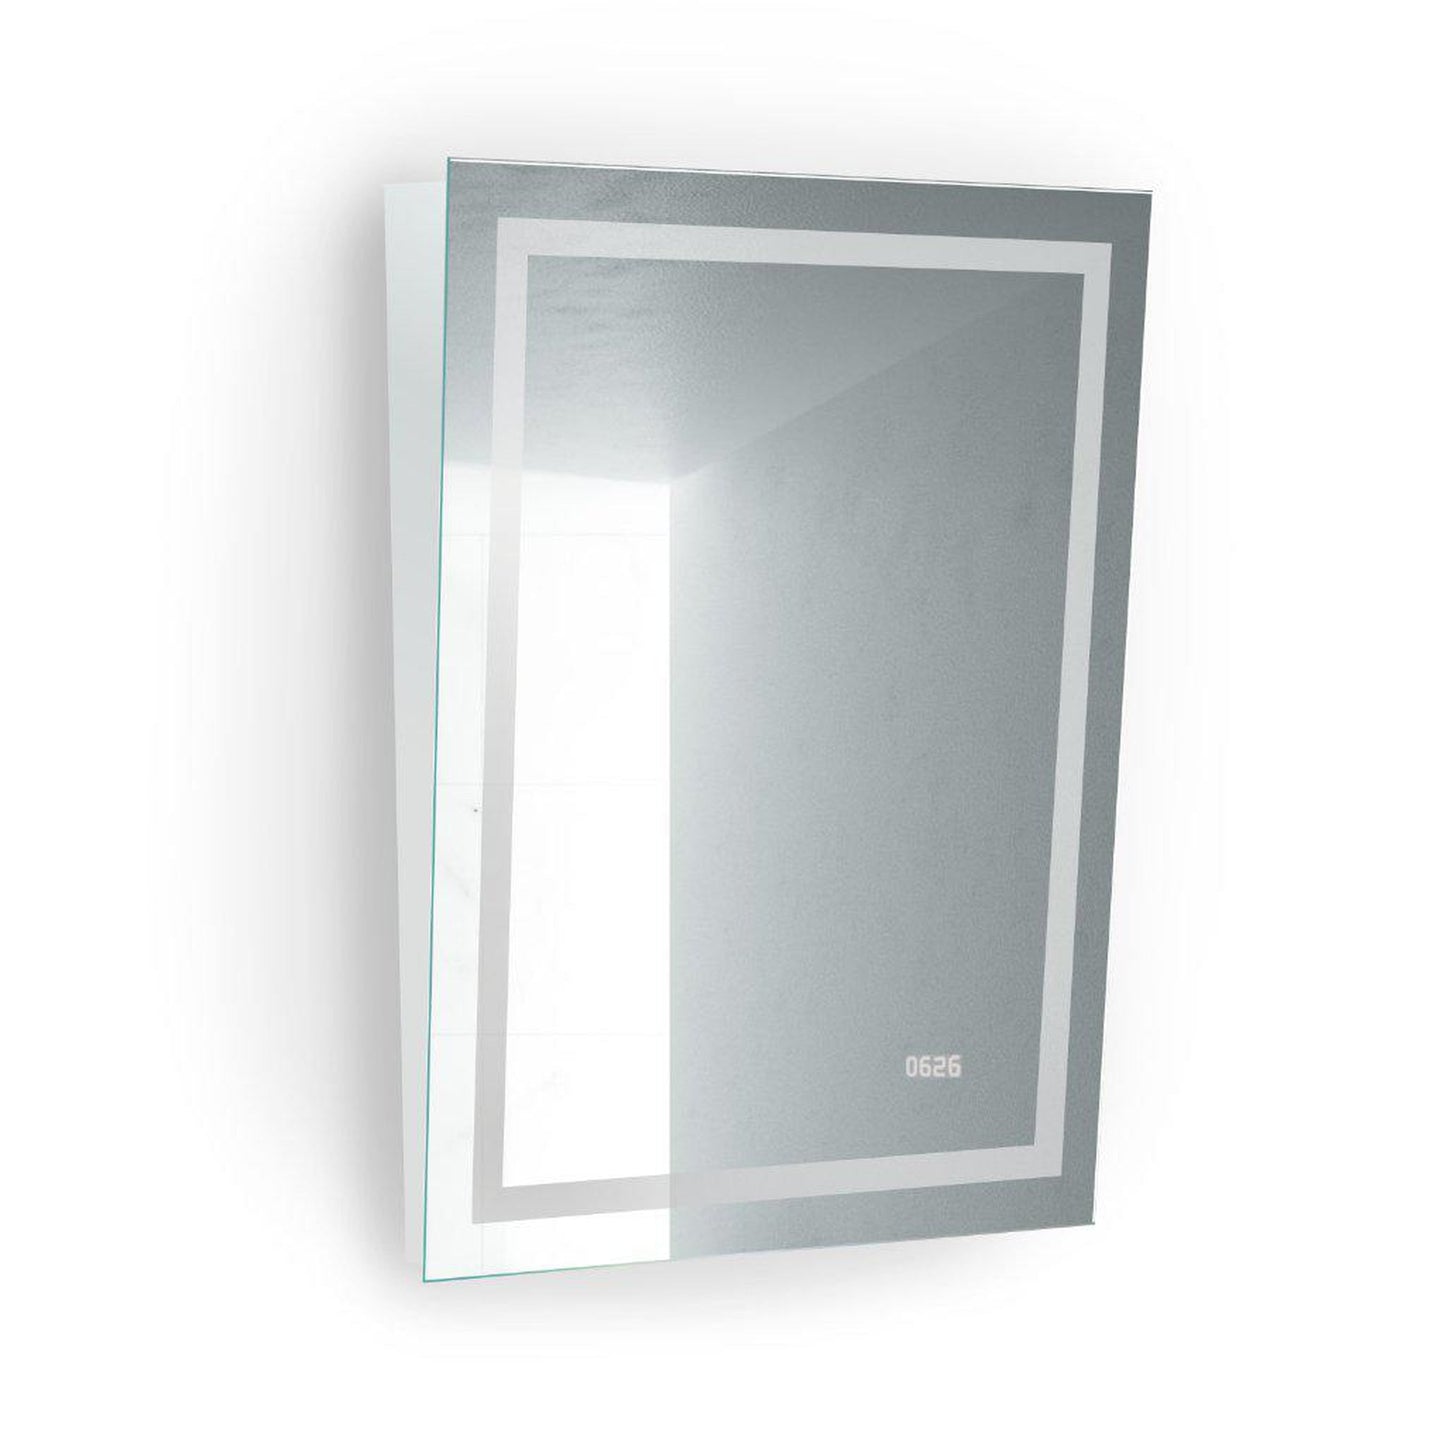 Krugg Reflections Icon 24” x 32” 4000K Rectangular Tilted Wall-Mounted Illuminated Silver Backed LED Mirror With Built-in Defogger and Touch Sensor On/Off Built-in Dimmer